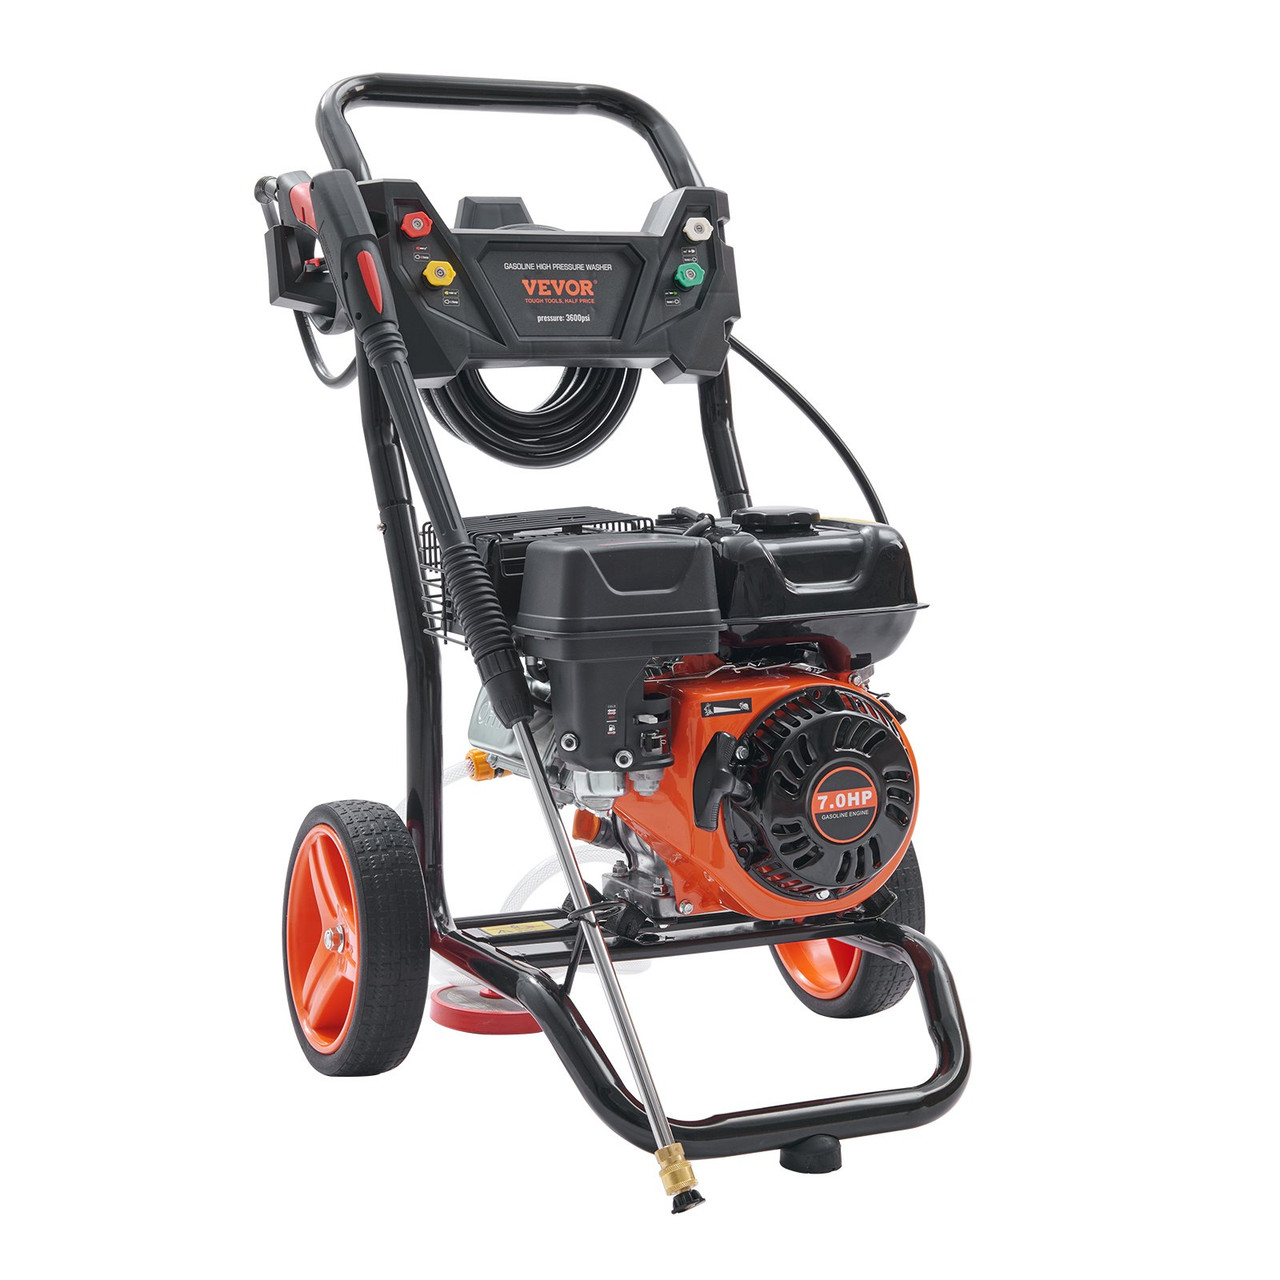 VEVOR Gas Pressure Washer, 3600 PSI 2.6 GPM, Gas Powered Pressure Washer with Copper Pump, Spray Gun and Extension Wand, 5 Quick Connect Nozzles, for Cleaning Cars, Homes, Driveways, Patios